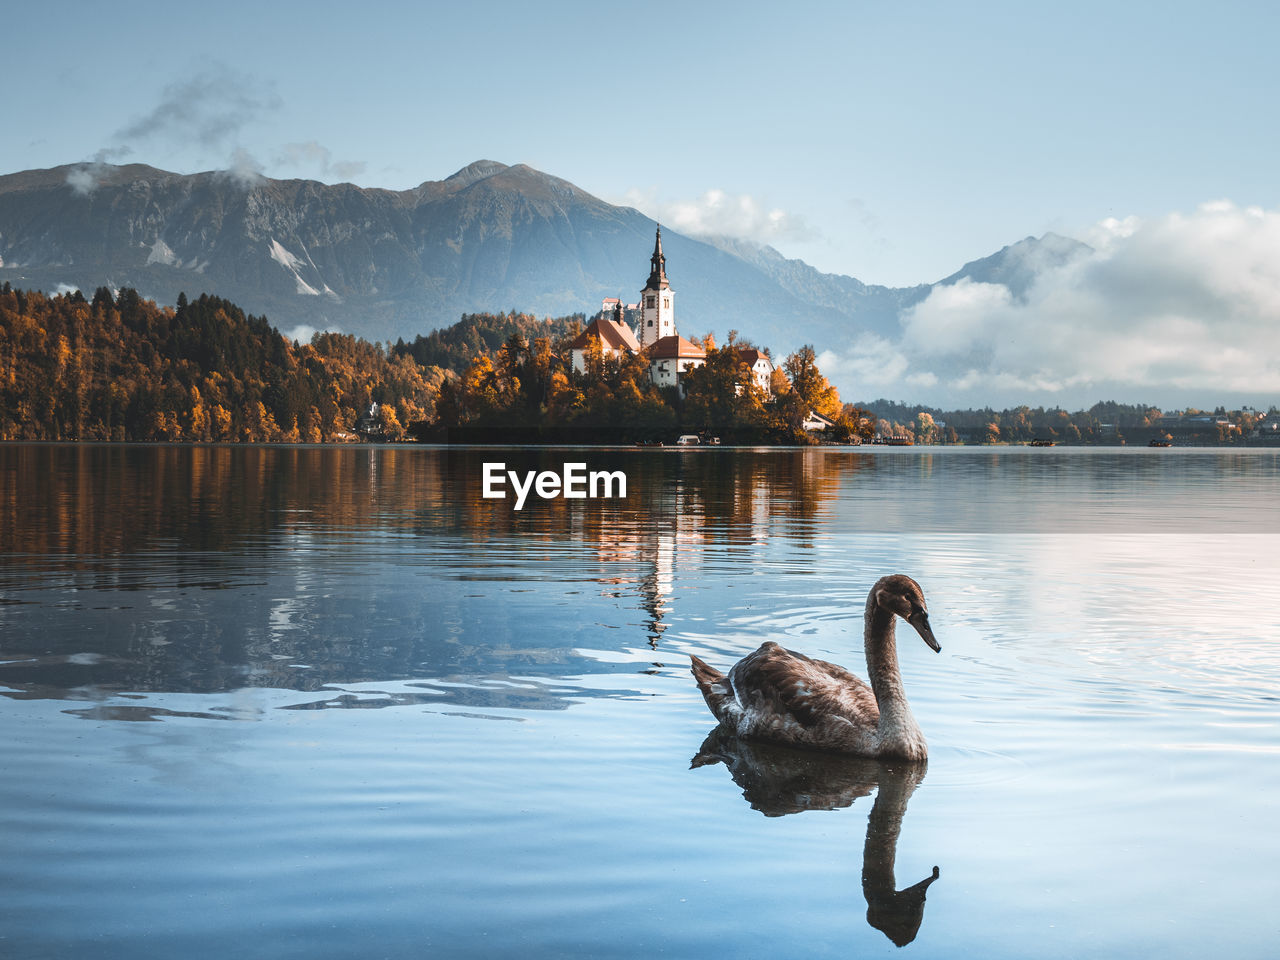 Swans swimming in lake against mountain range with bled church and mountains in background